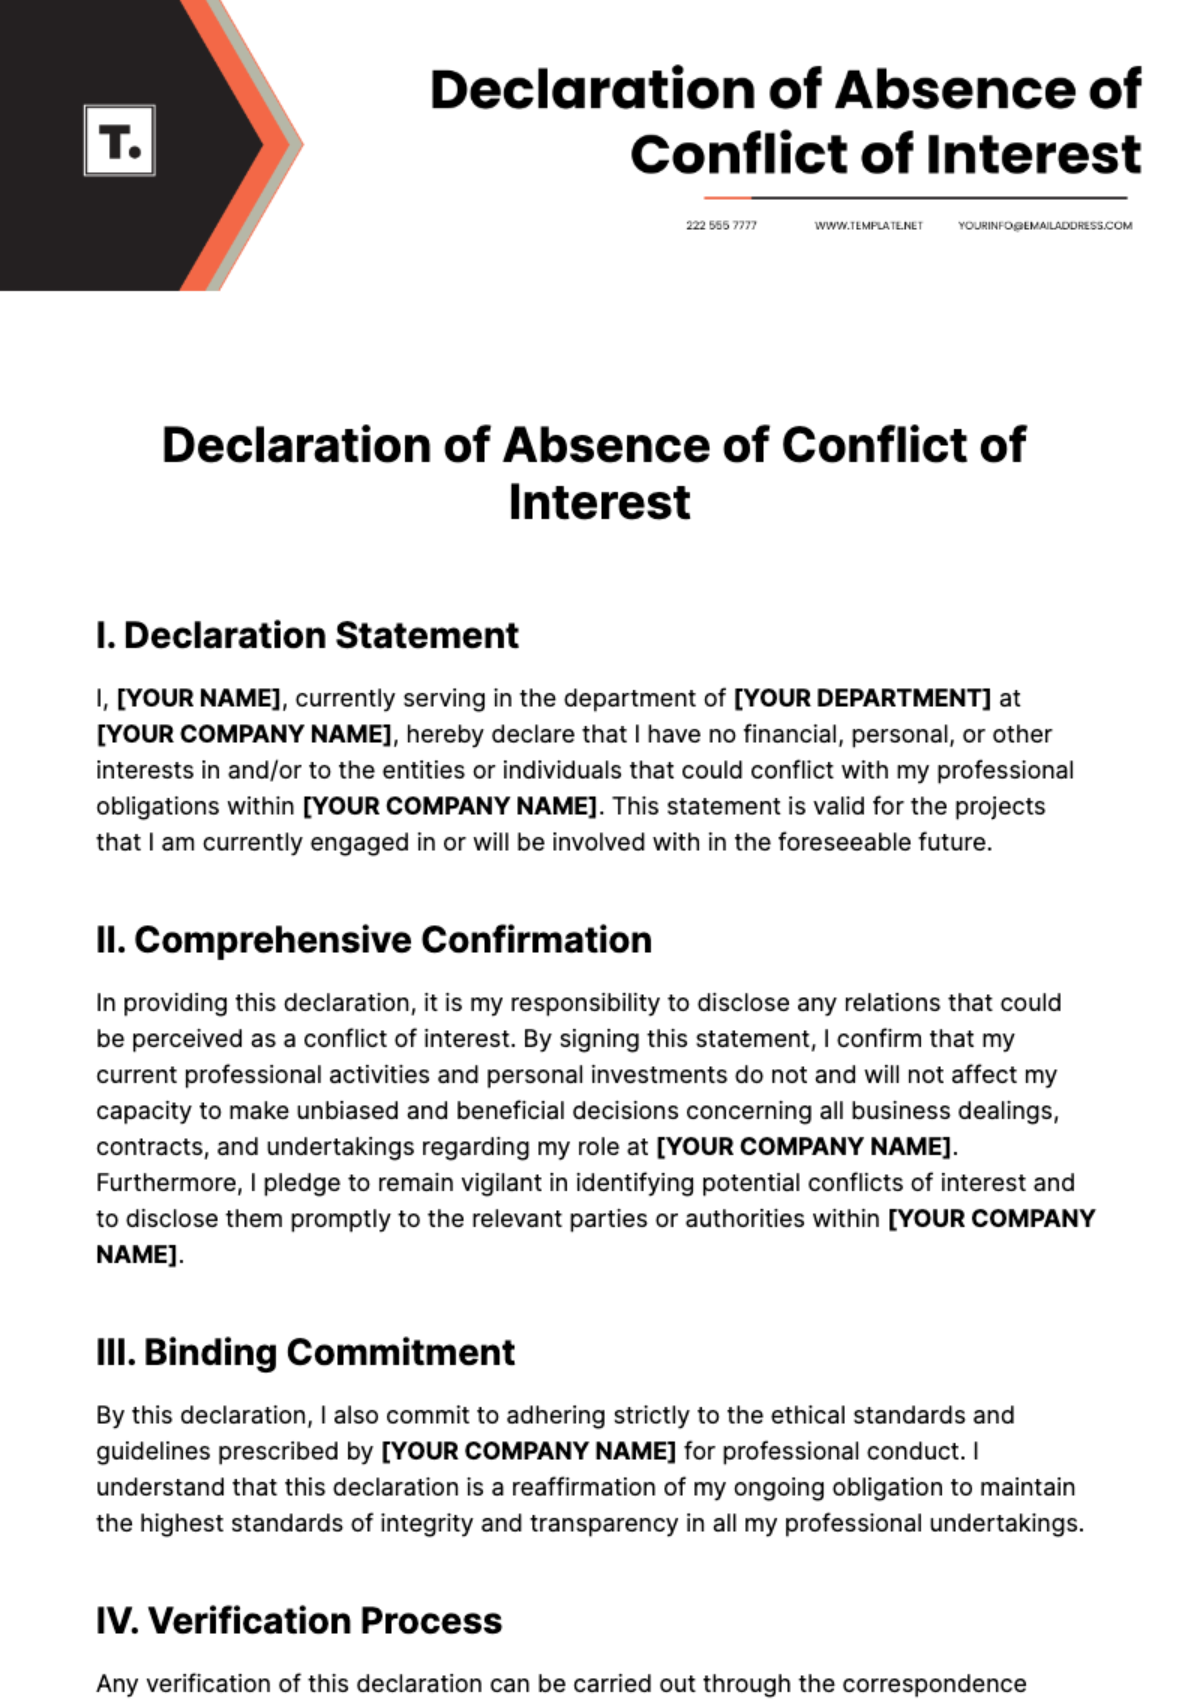 Free Declaration of Absence of Conflict of Interest Template